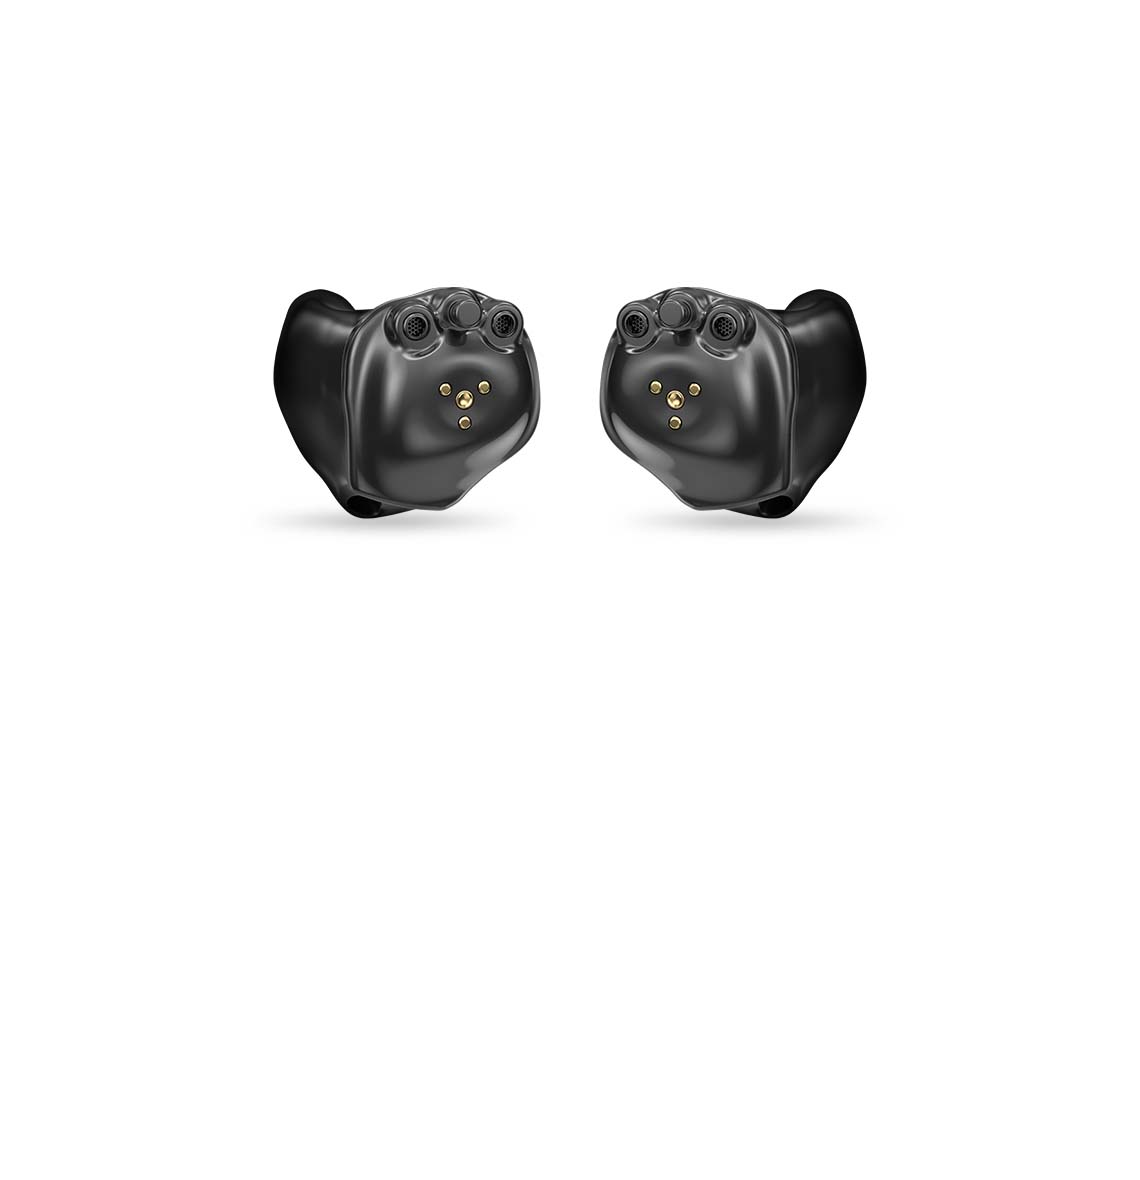 A pair of Black ITC R hearing aids